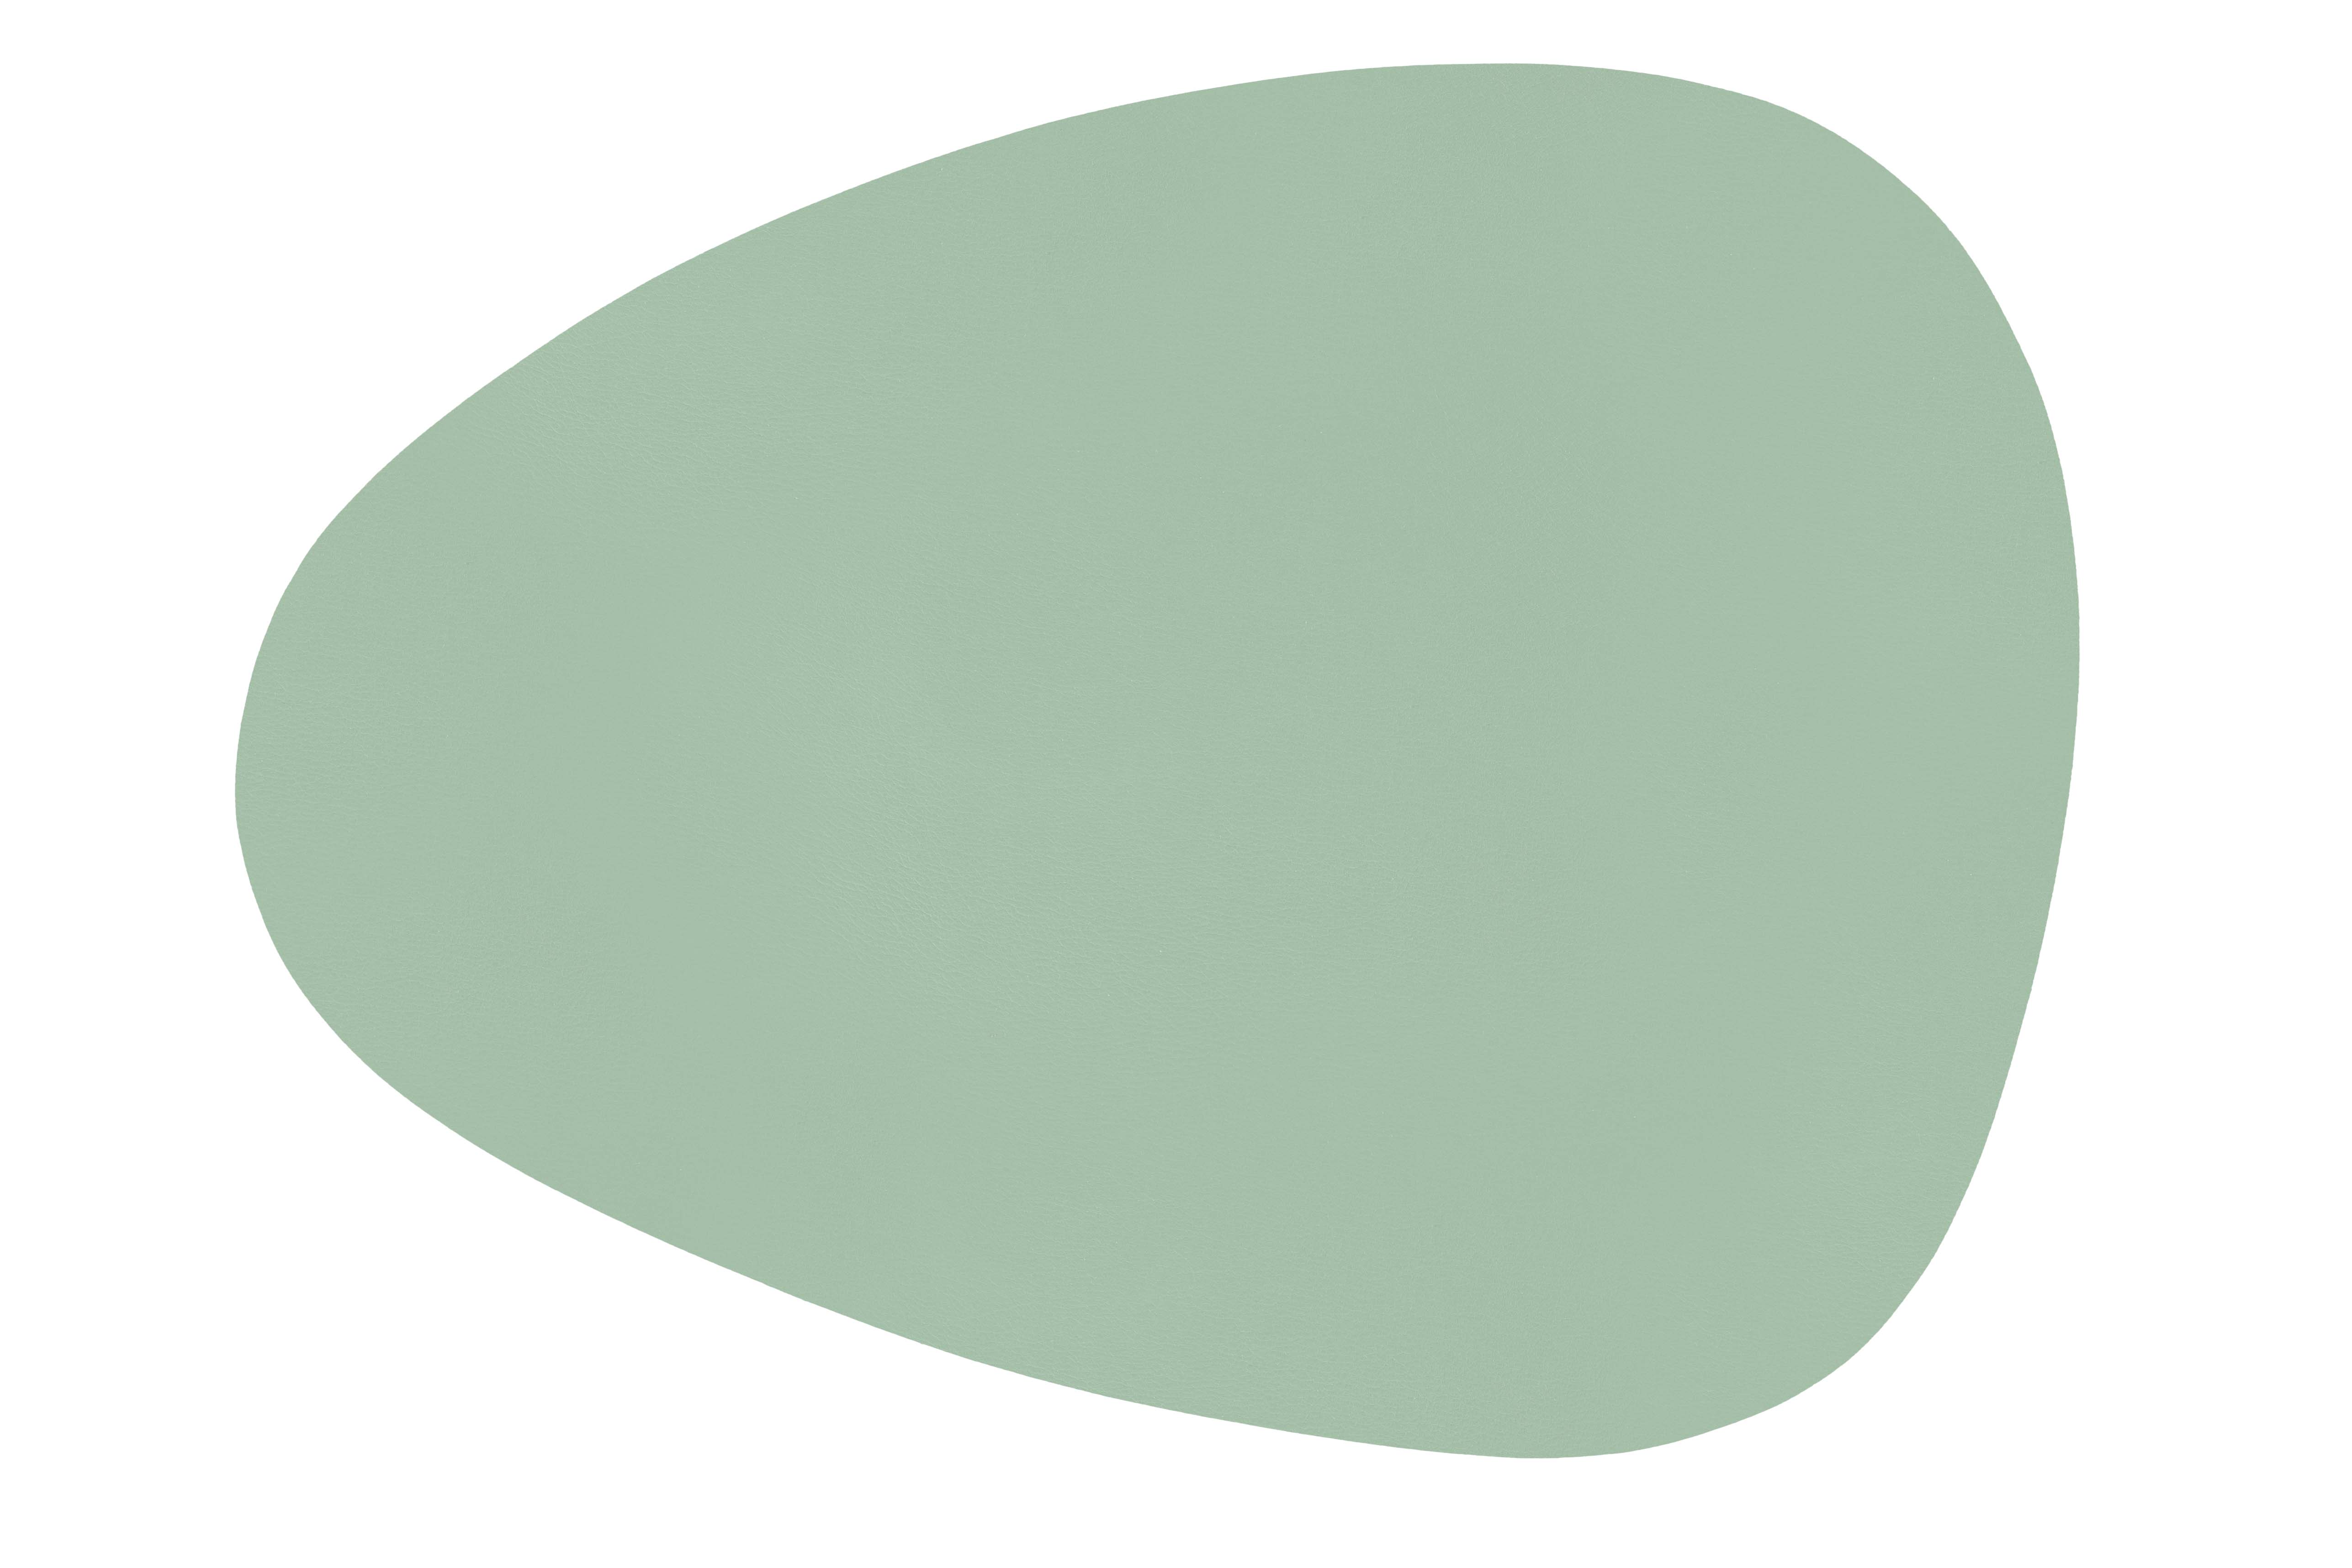 Placemat STONE - TOGO - 43x32cm, green